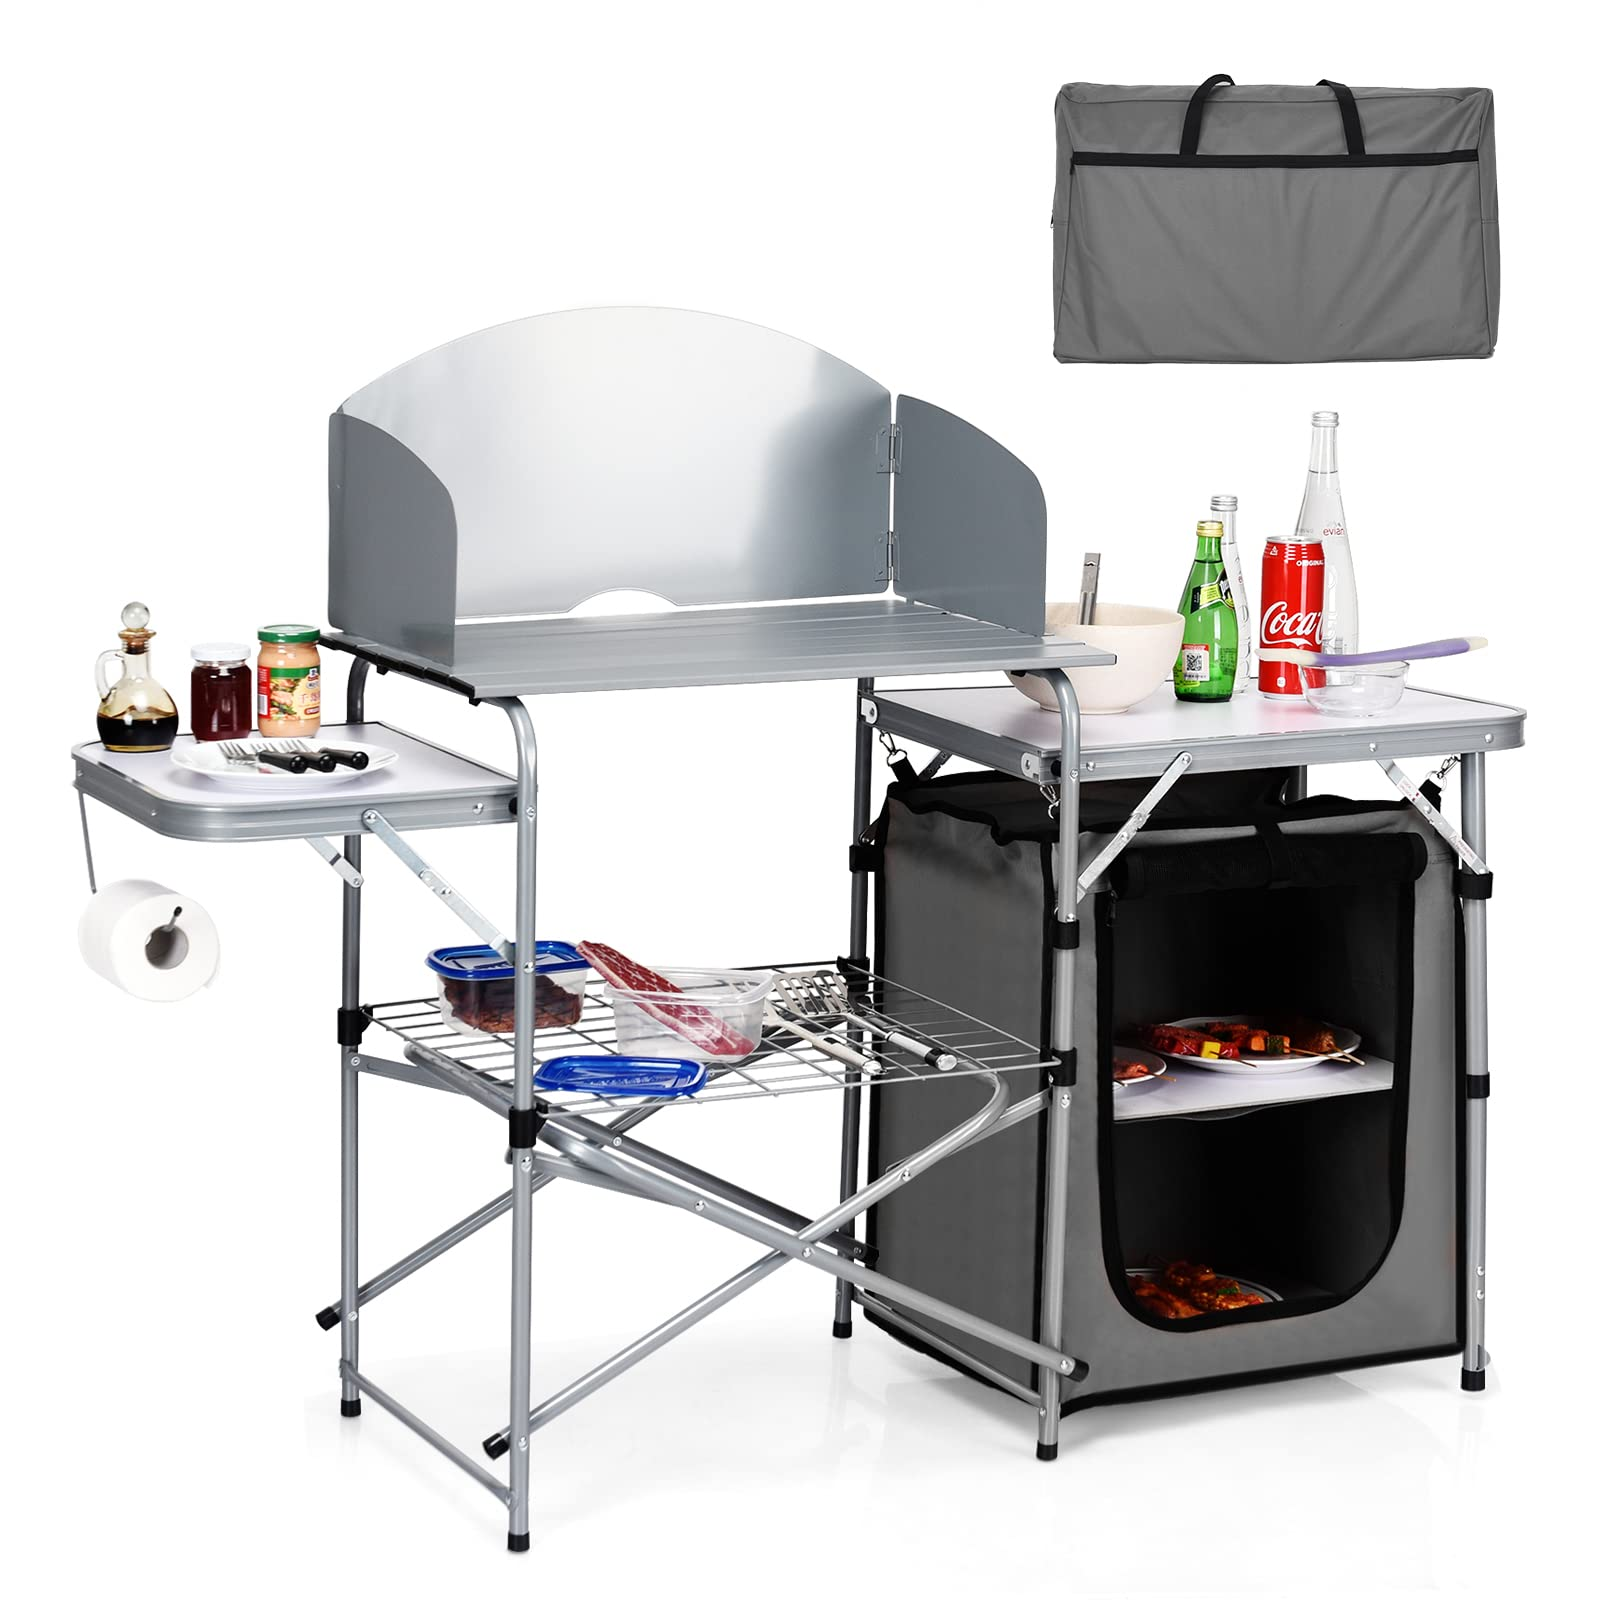 Giantex Folding Grill Table with 26'' Tabletop and Detachable Windscreen